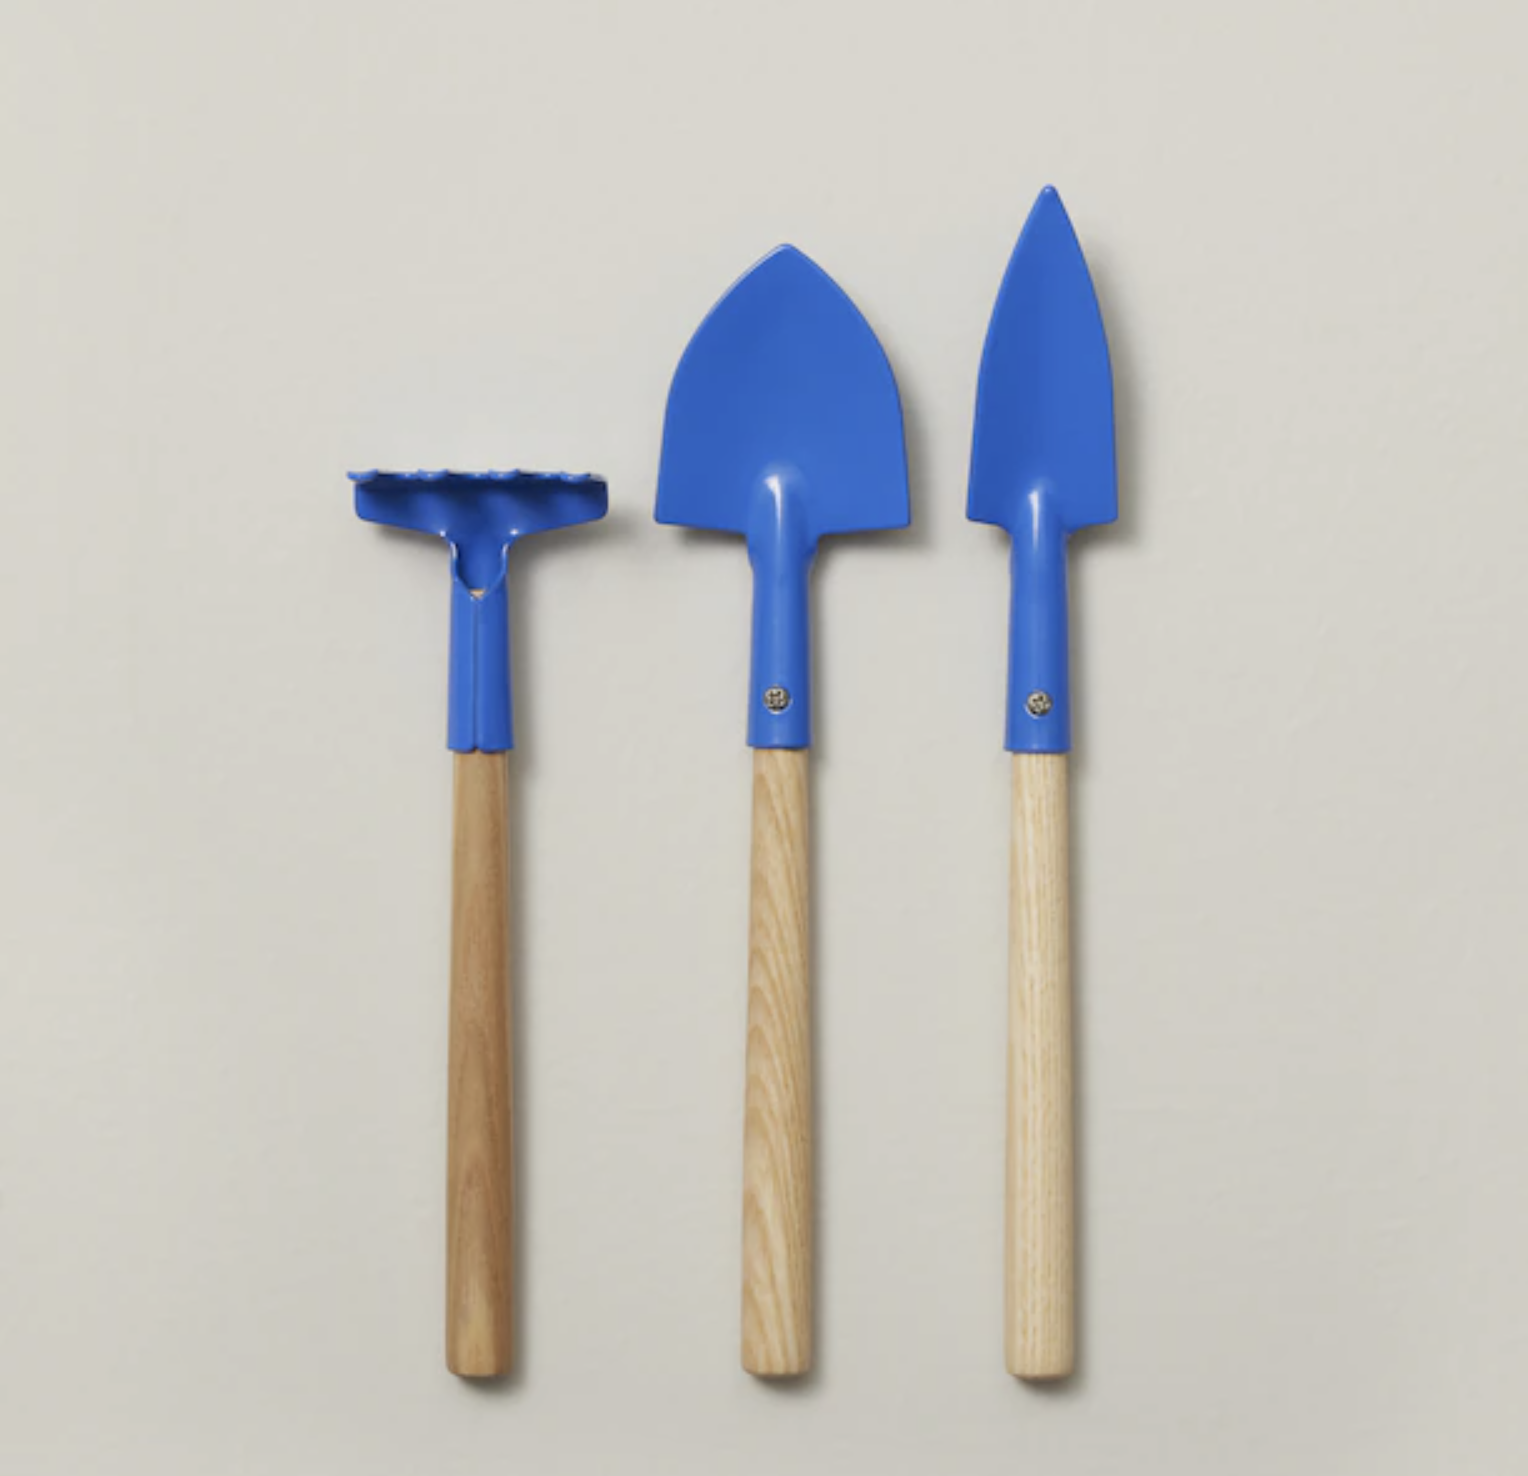 The three tools laid out in a row